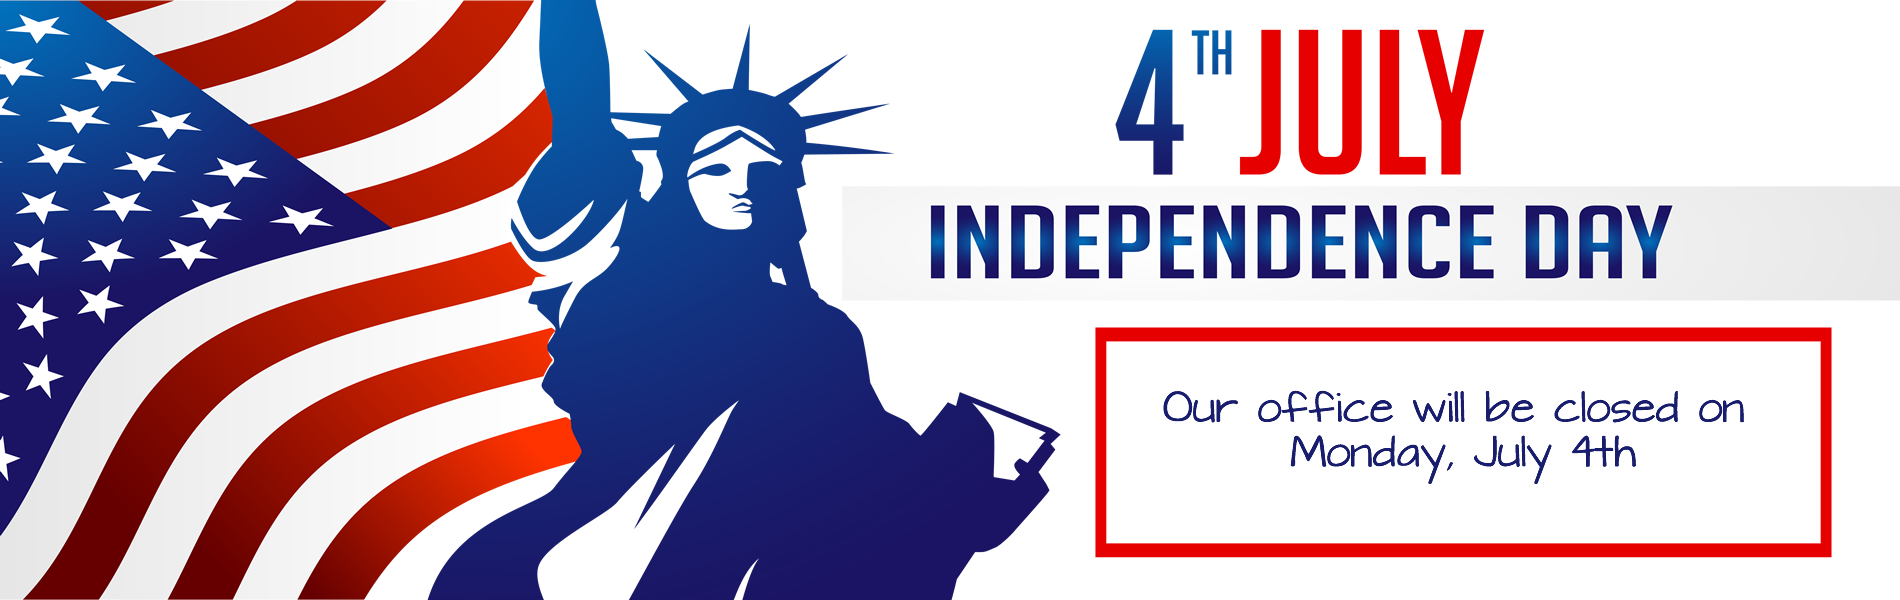 4th July Independence Day, Our office will close on Monday, July 4th 